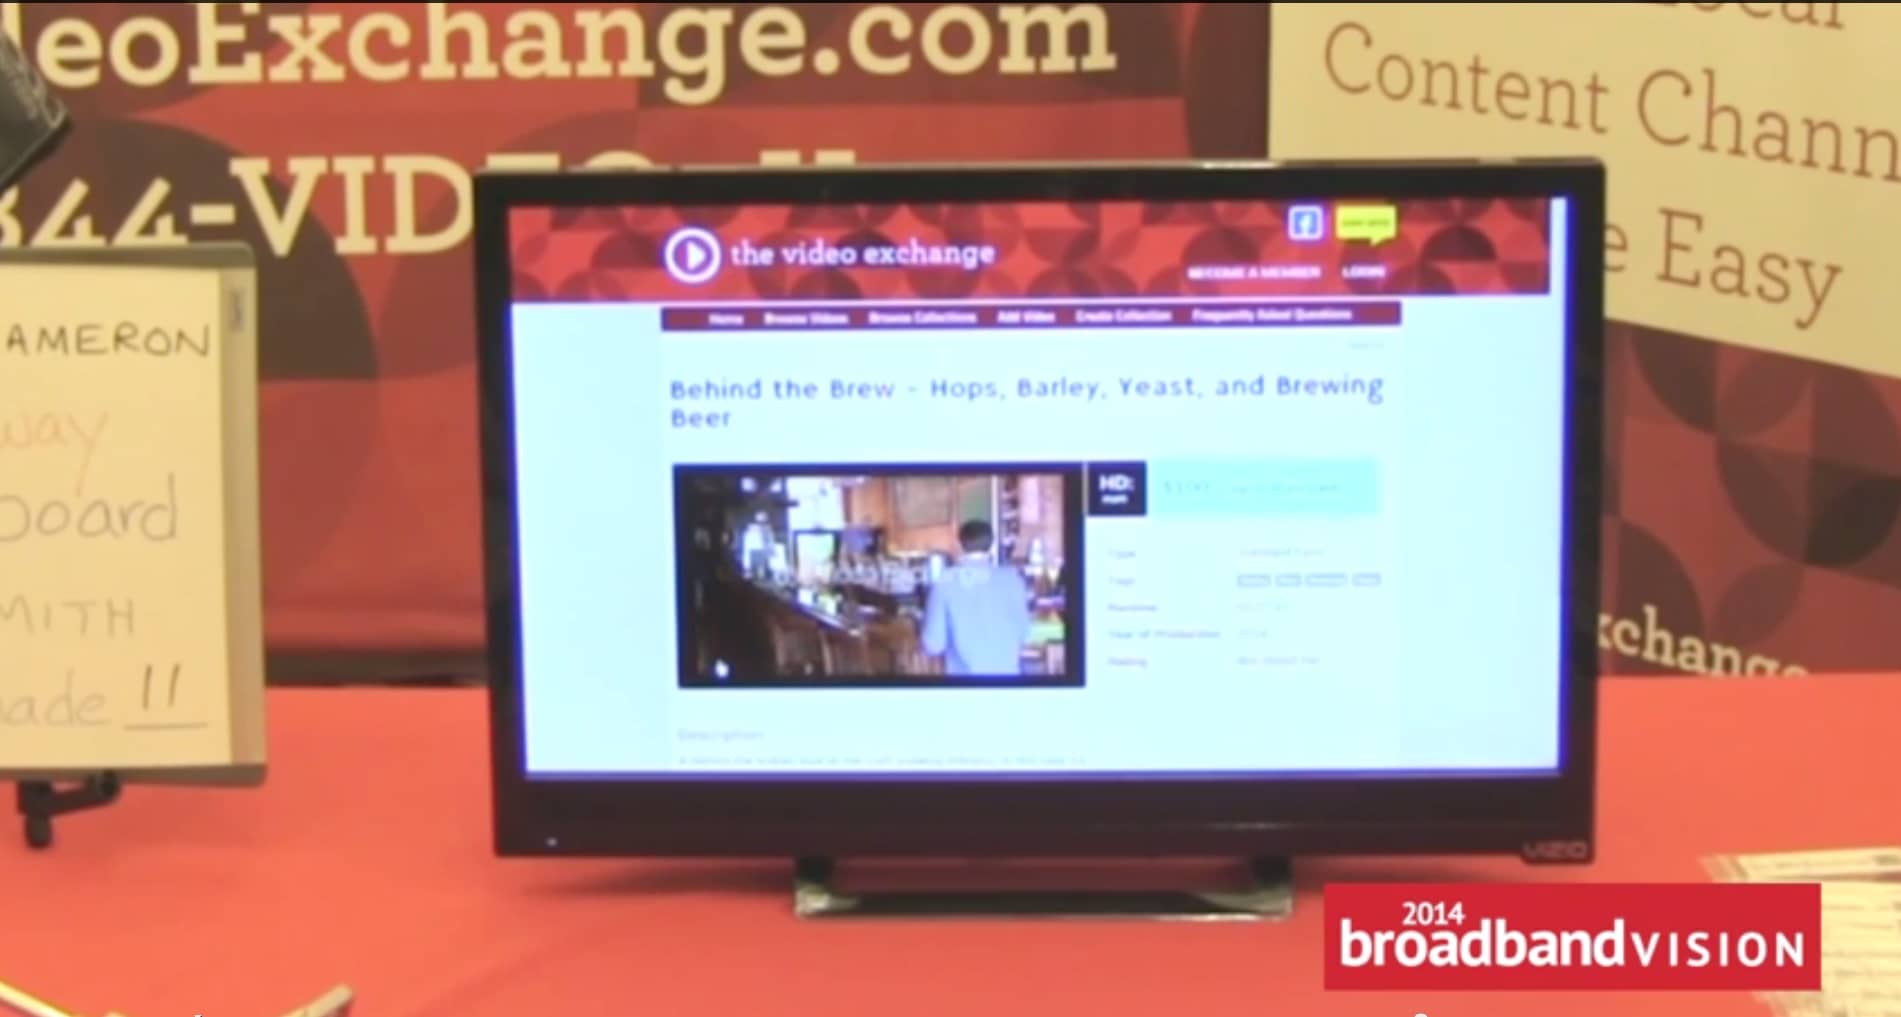 Behind the Brew on display at the video exchange booth at the 2014 BroadbandVision show.